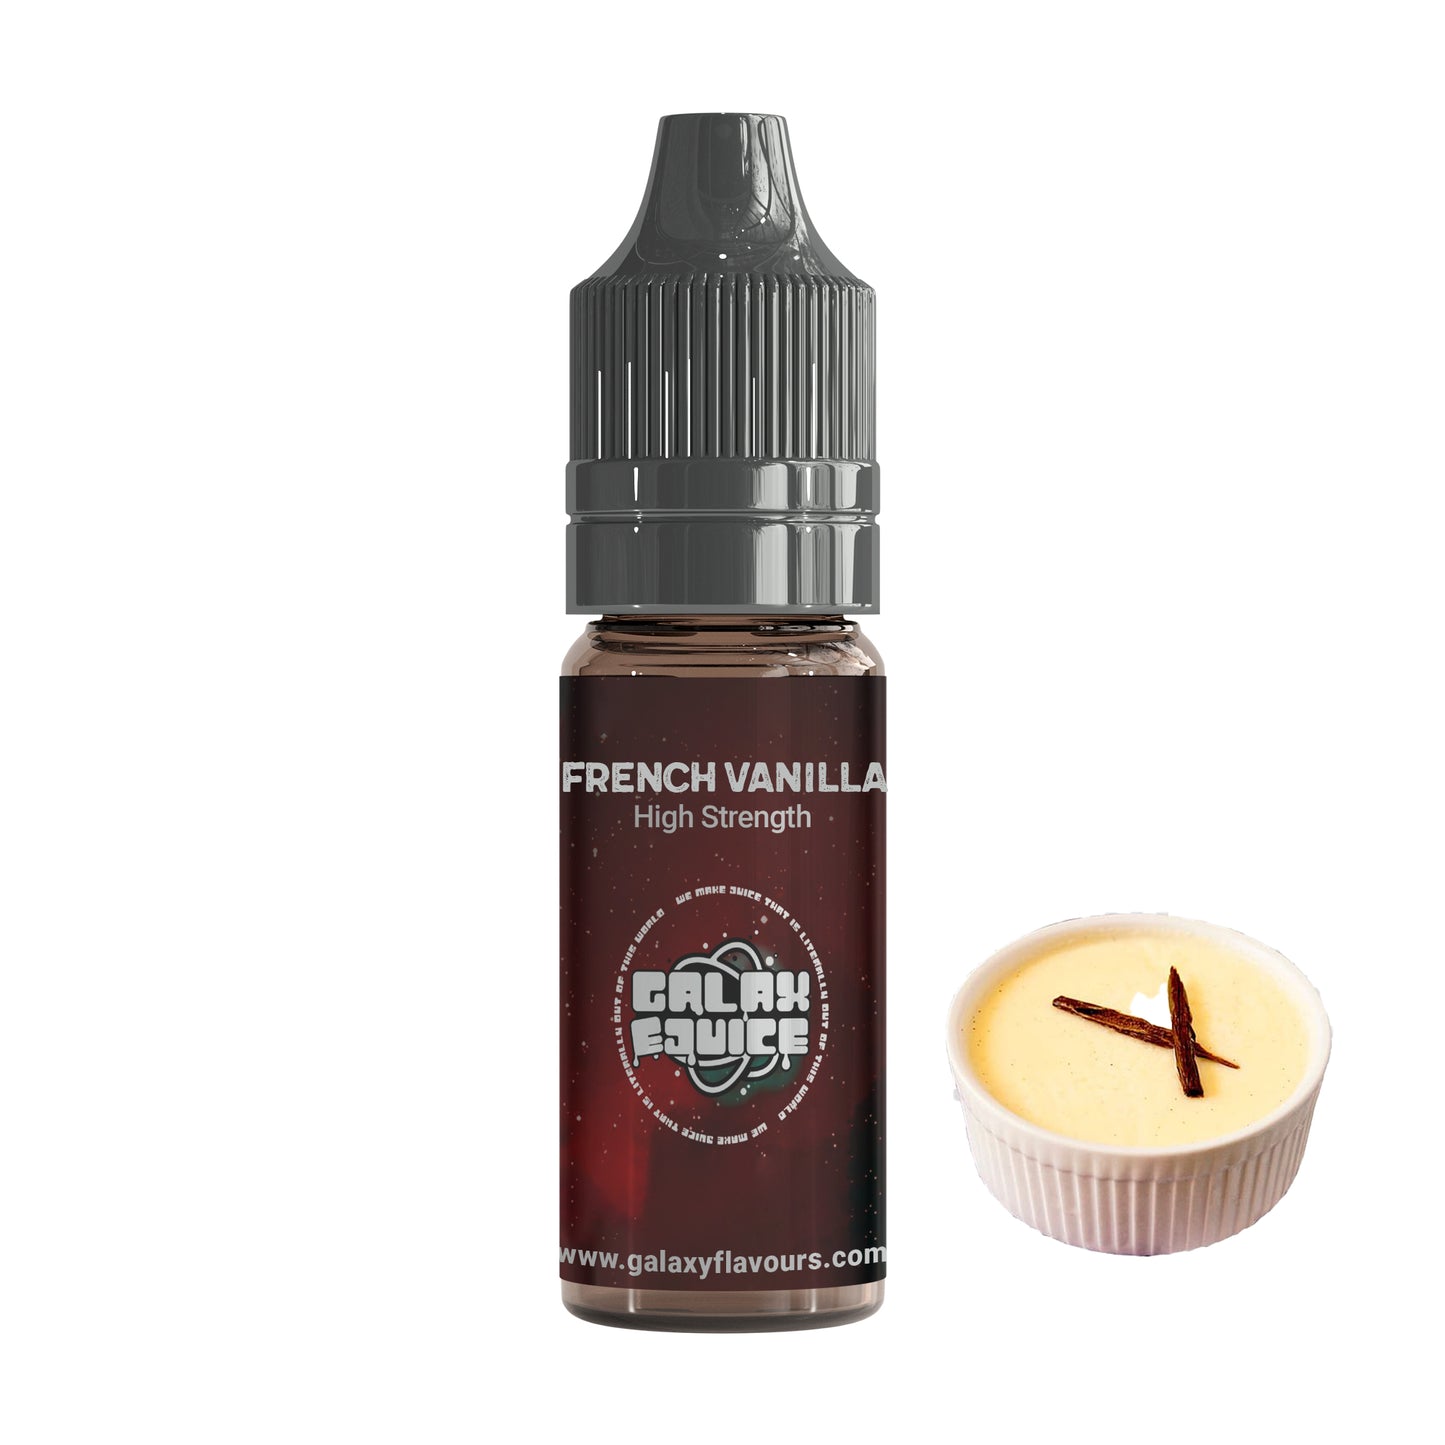 French Vanilla High Strength Professional Flavouring.